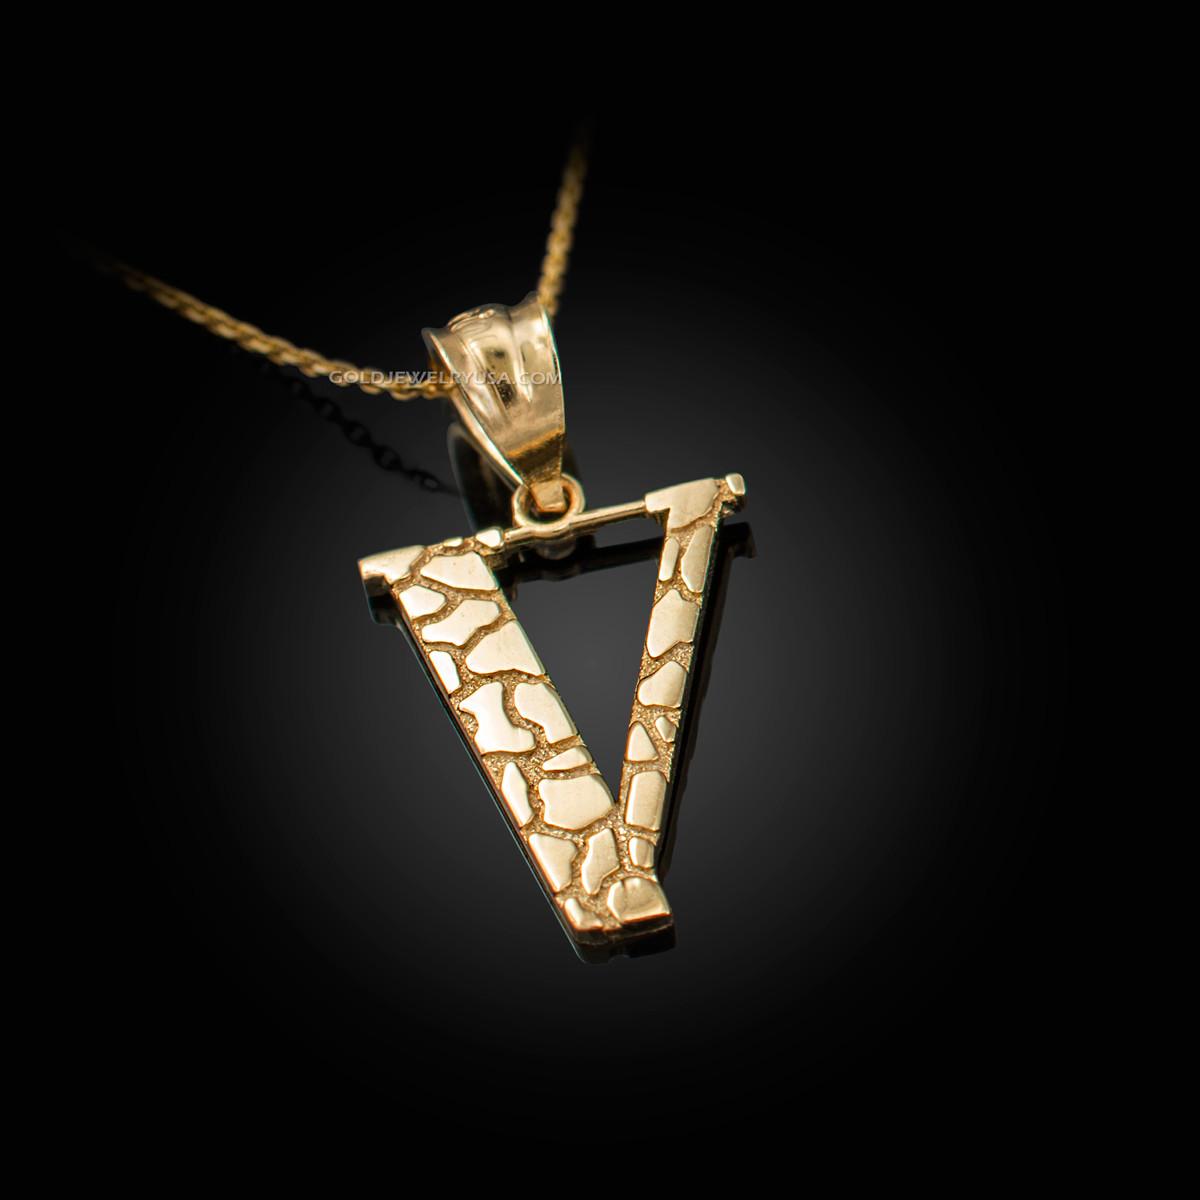 Letter A Pendant Necklace in Gold